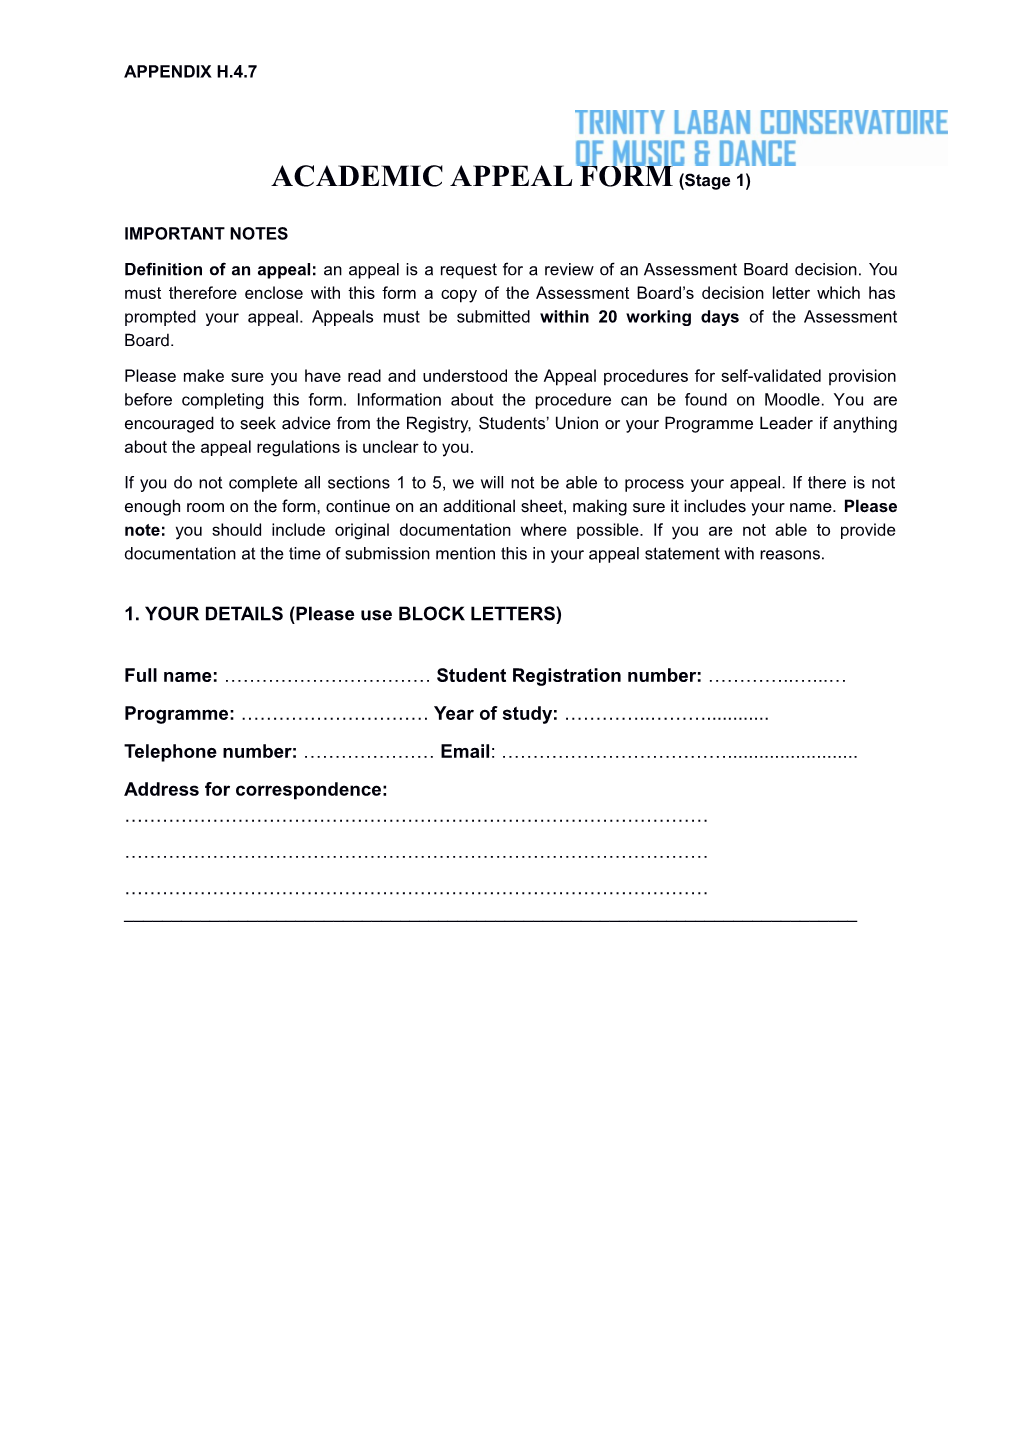 ACADEMIC APPEAL FORM (Stage 1)